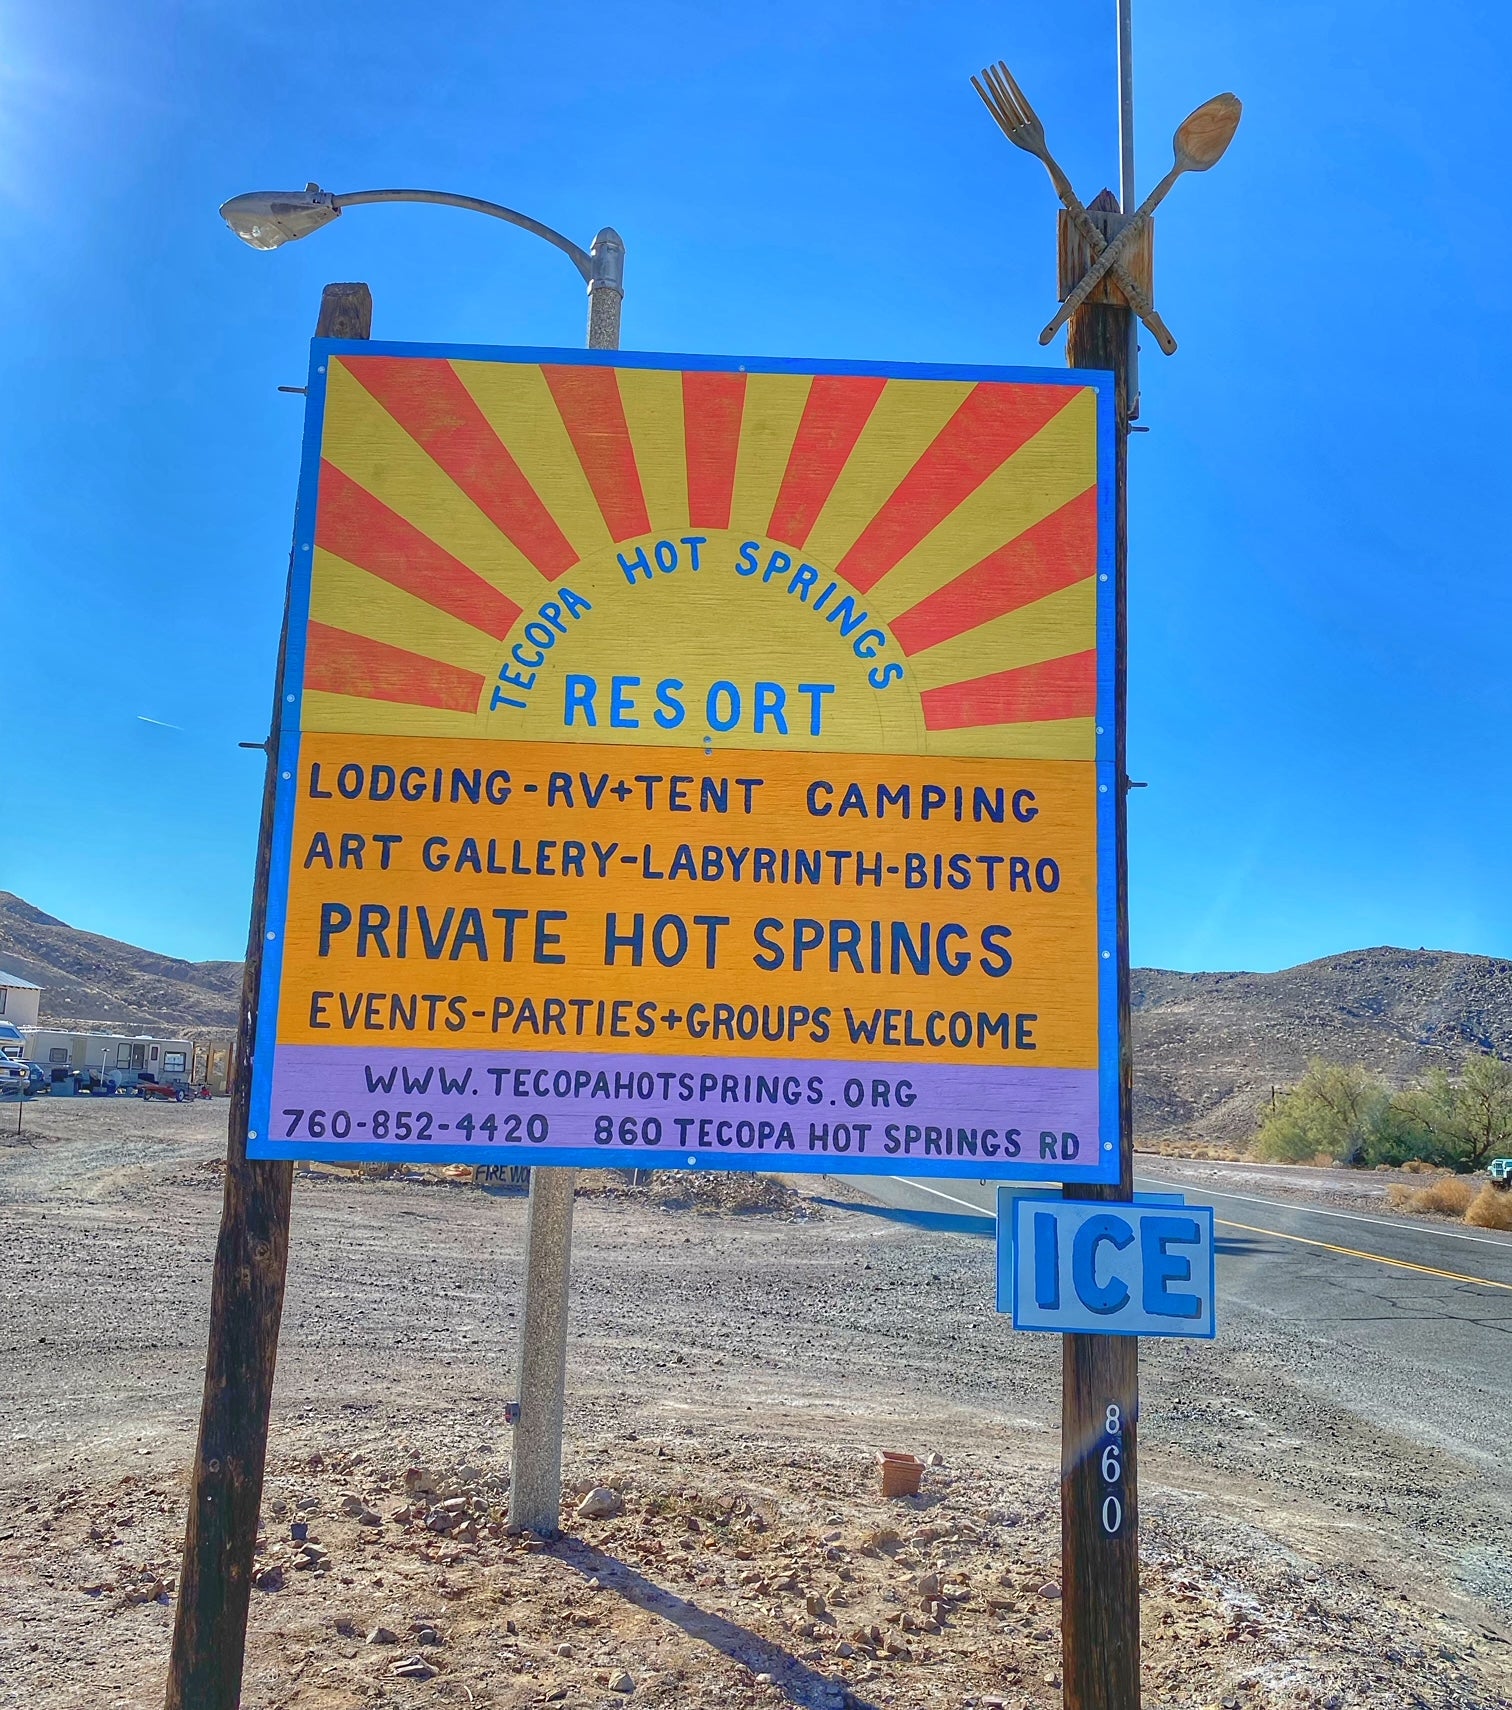 Camper submitted image from Tecopa Hot Springs Resort - 1